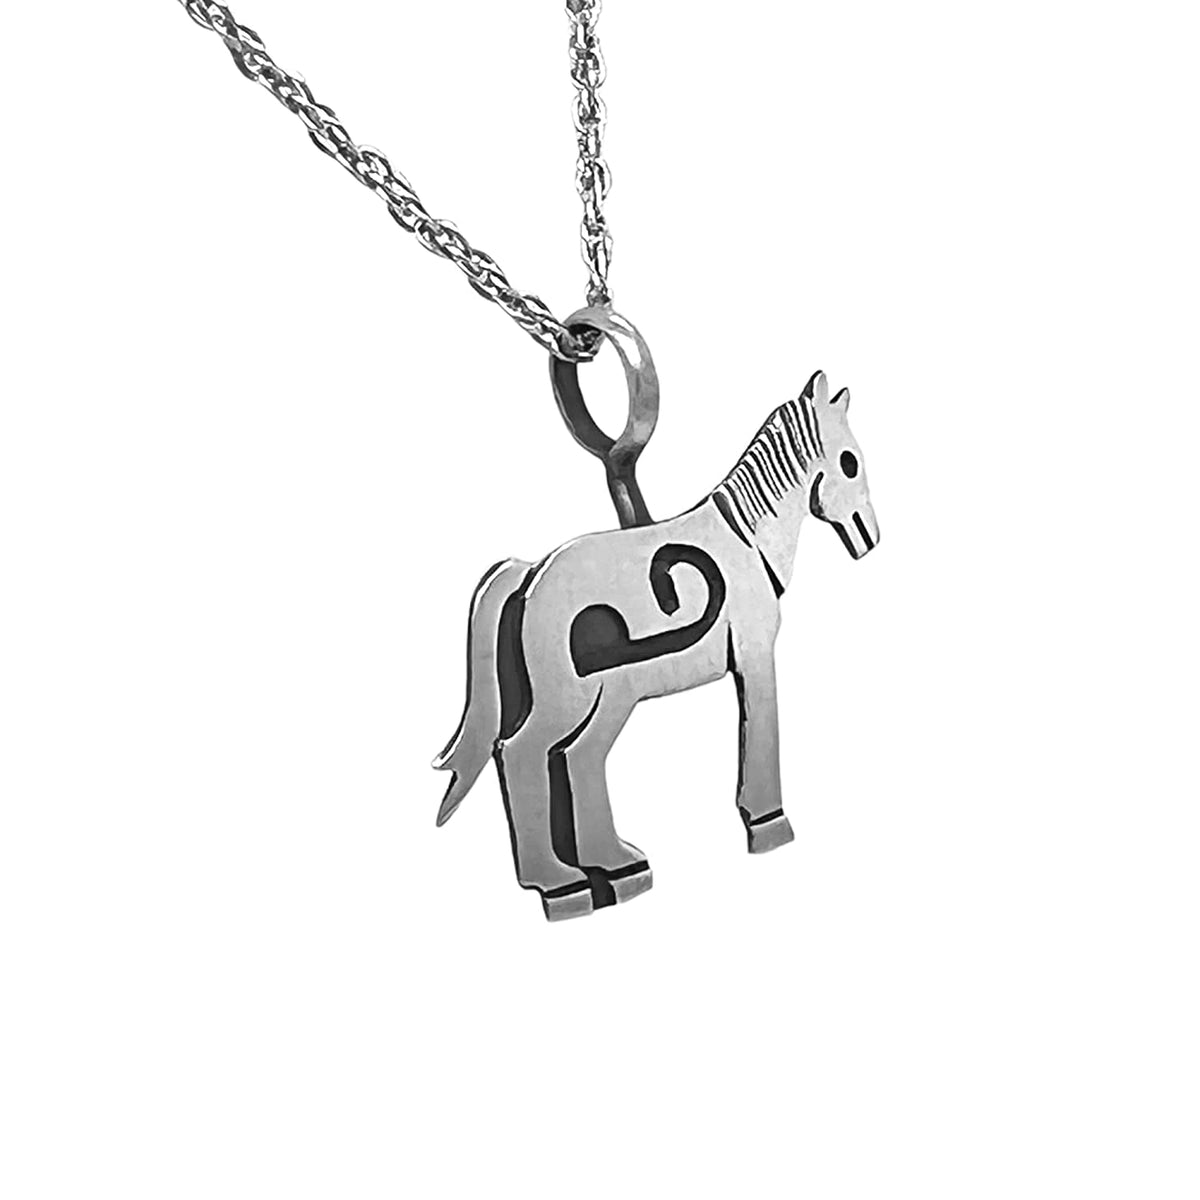 Genuine Sterling Silver Horse Necklace, Pendant and Chain Set, 925 Sterling Silver, Native American USA Handmade, Nickel Free